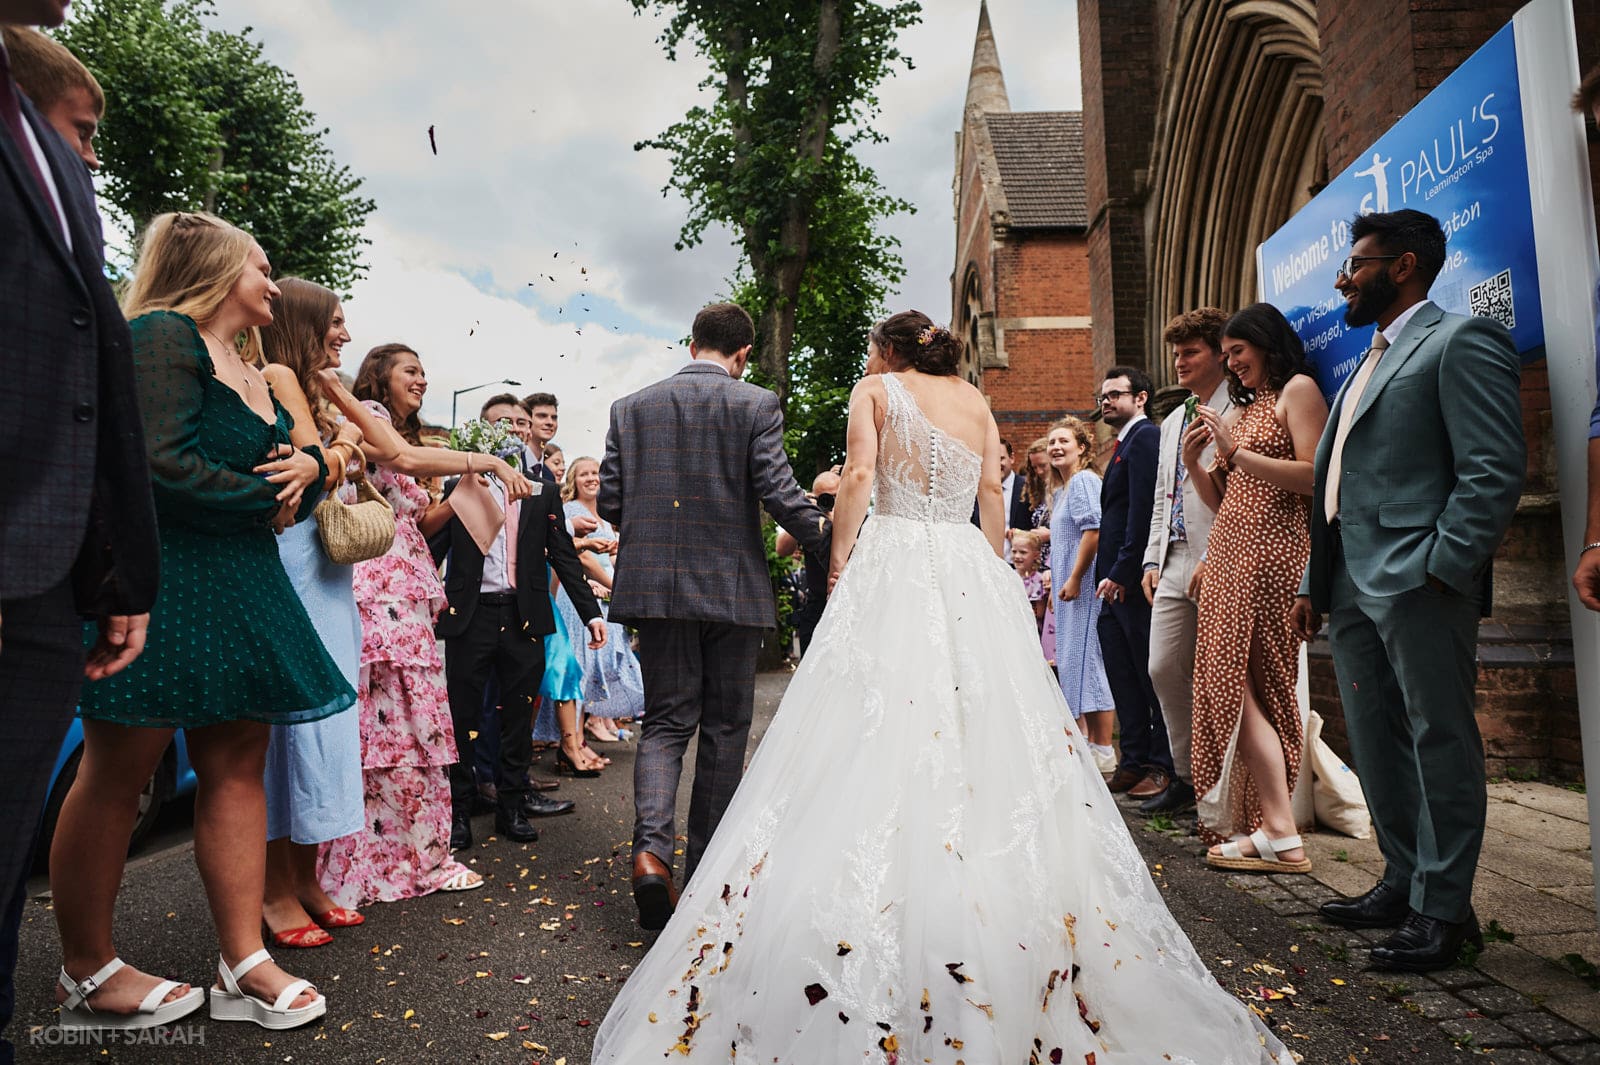 Bride and groom have confetti thrown over them by wedding guests